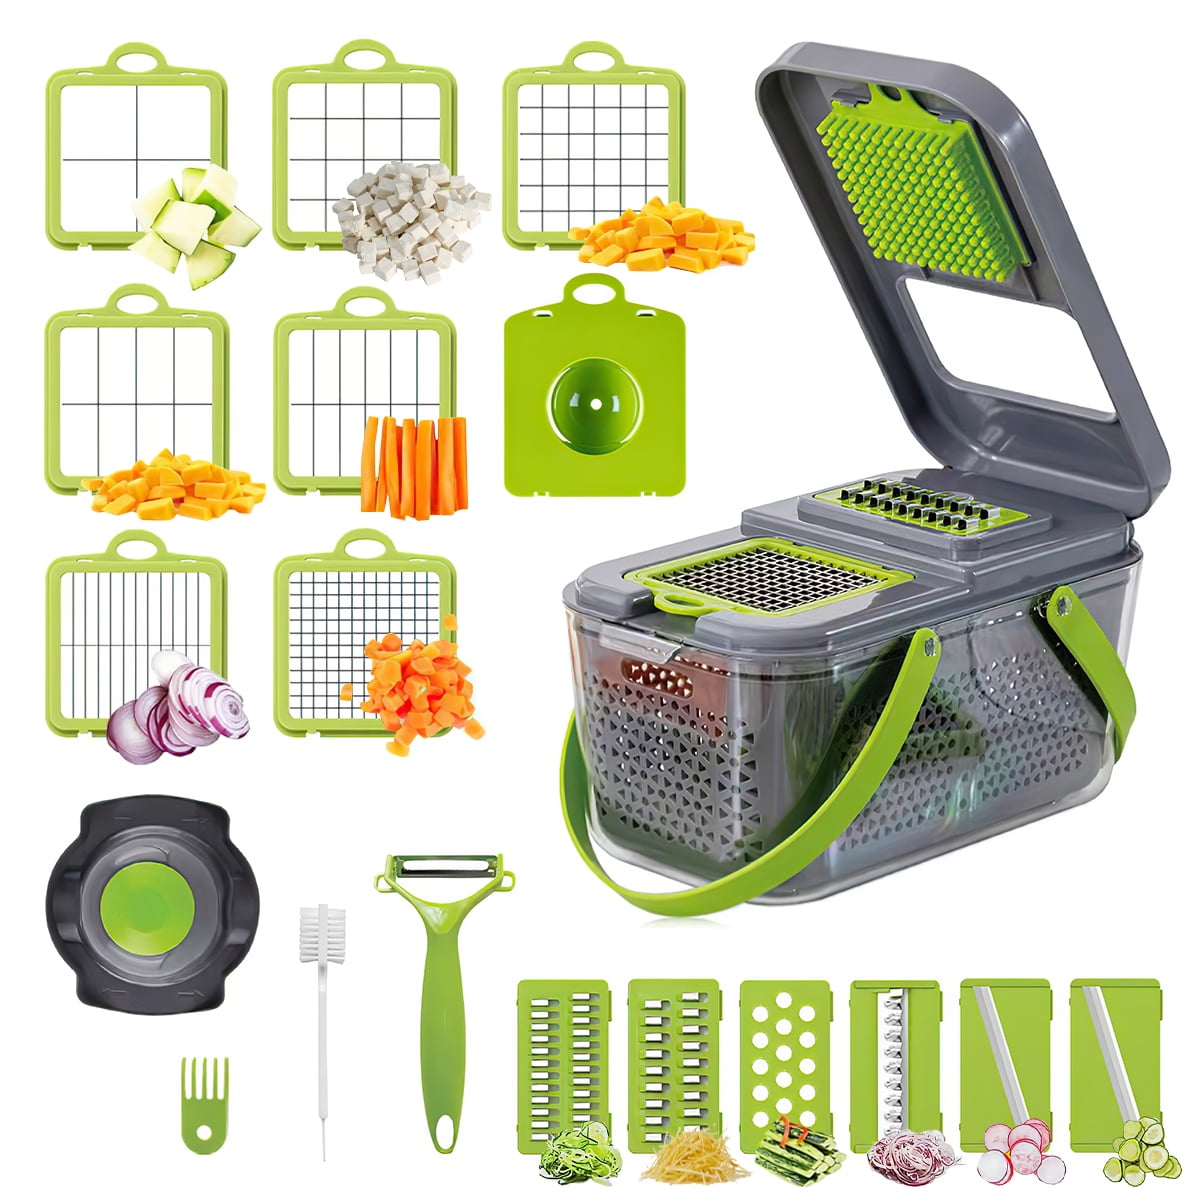 MegaChef 8-in-1 Multi-Use Slicer, Dicer and Chopper 985103072M